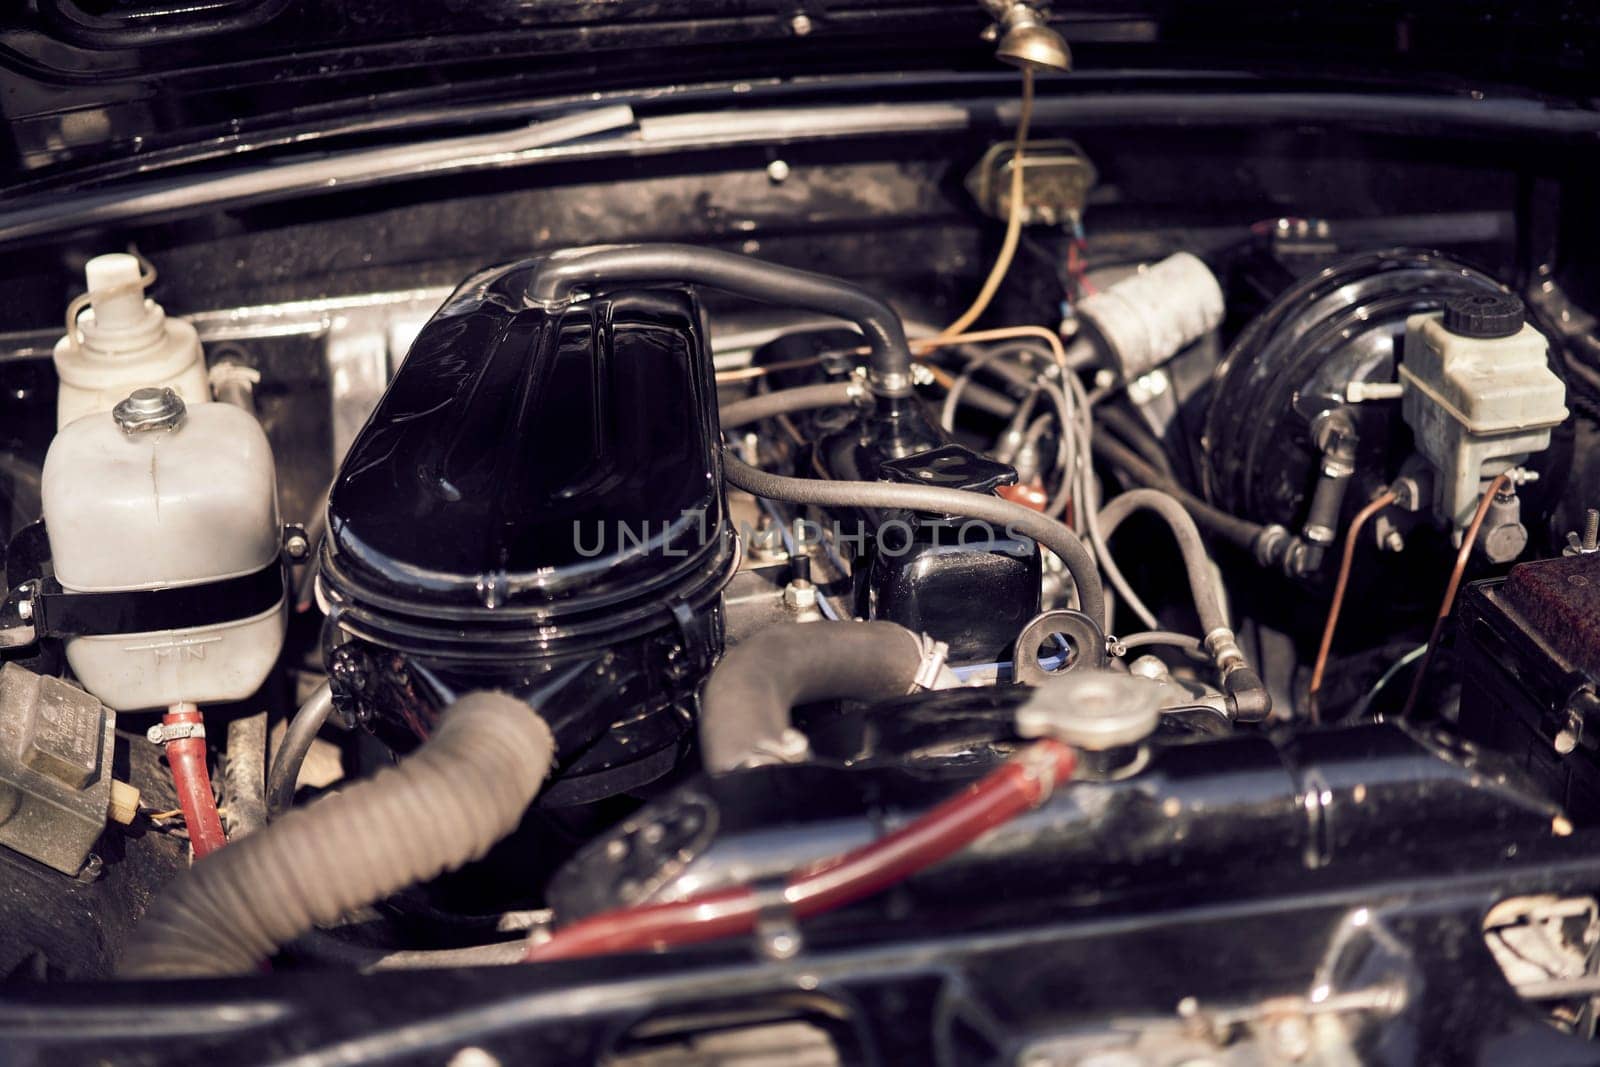 A detailed view of a classic car engine shows mechanical parts and wiring components under the hood